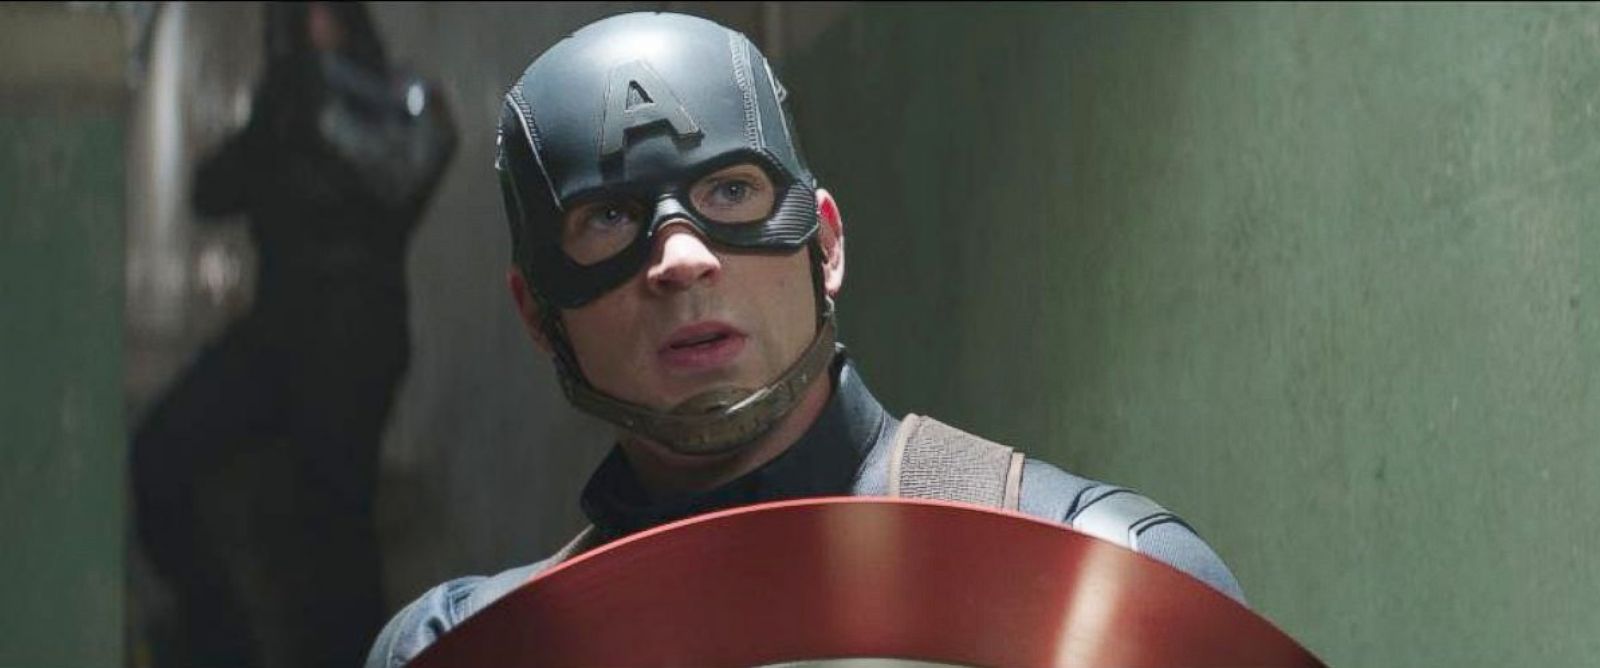 New Captain America Book Suggests He's a Member of Hydra